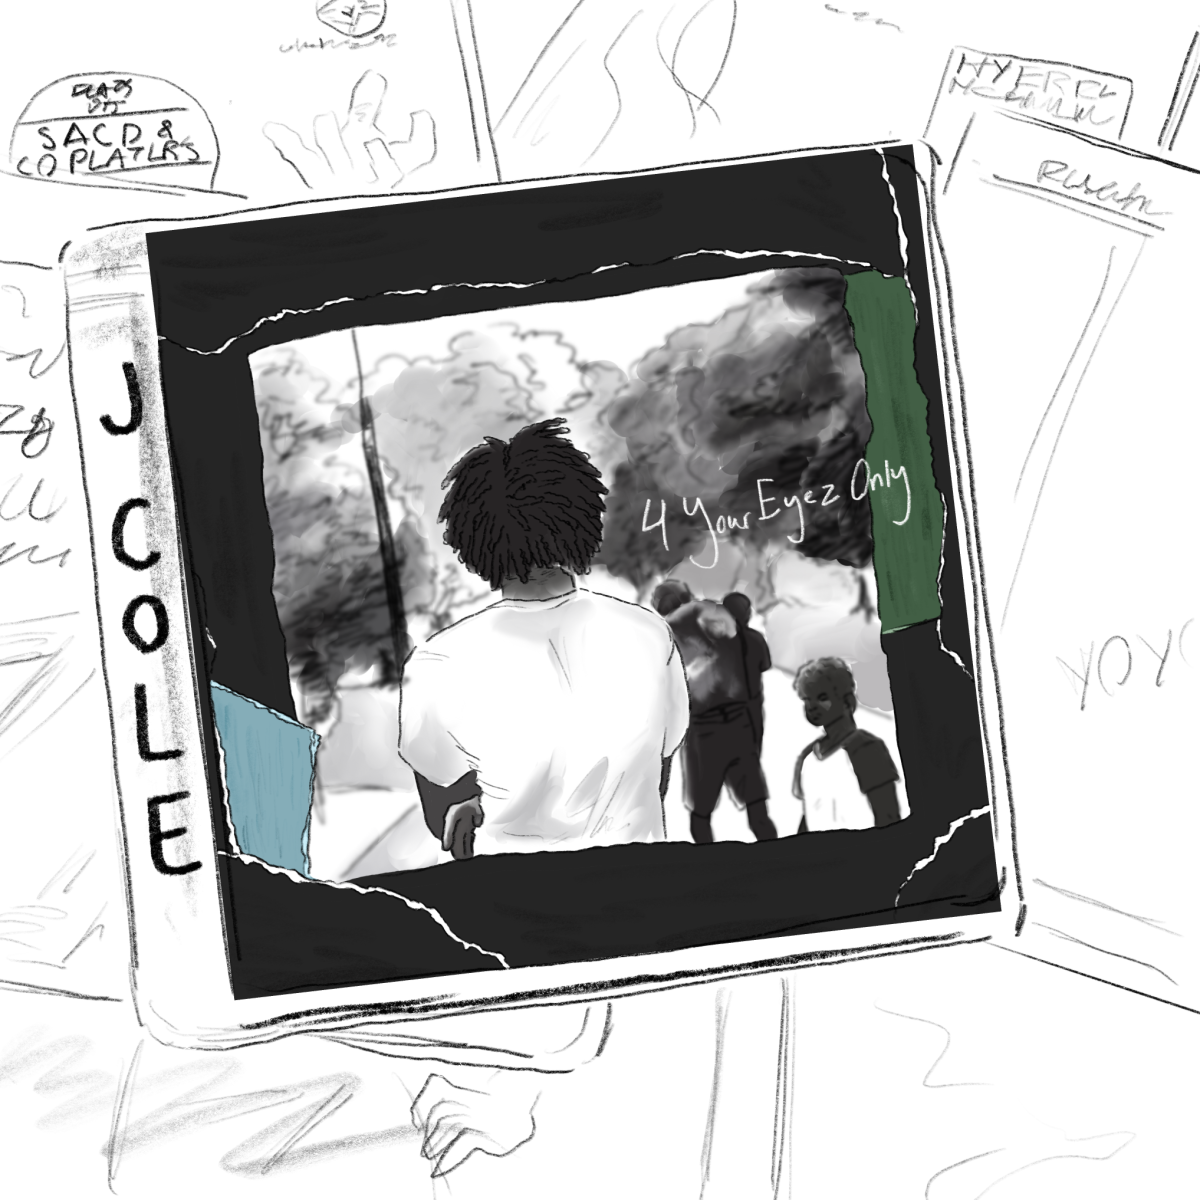 Released in December 2016, J. Coles 4 Your Eyez Only narrates the life of a friend, using the alias James to protect his identity. While not reaching the commercial success of his previous album 2014 Forest Hill Drive, the compelling narrative in 4 Your Eyez Only makes it J. Coles most impactful work.